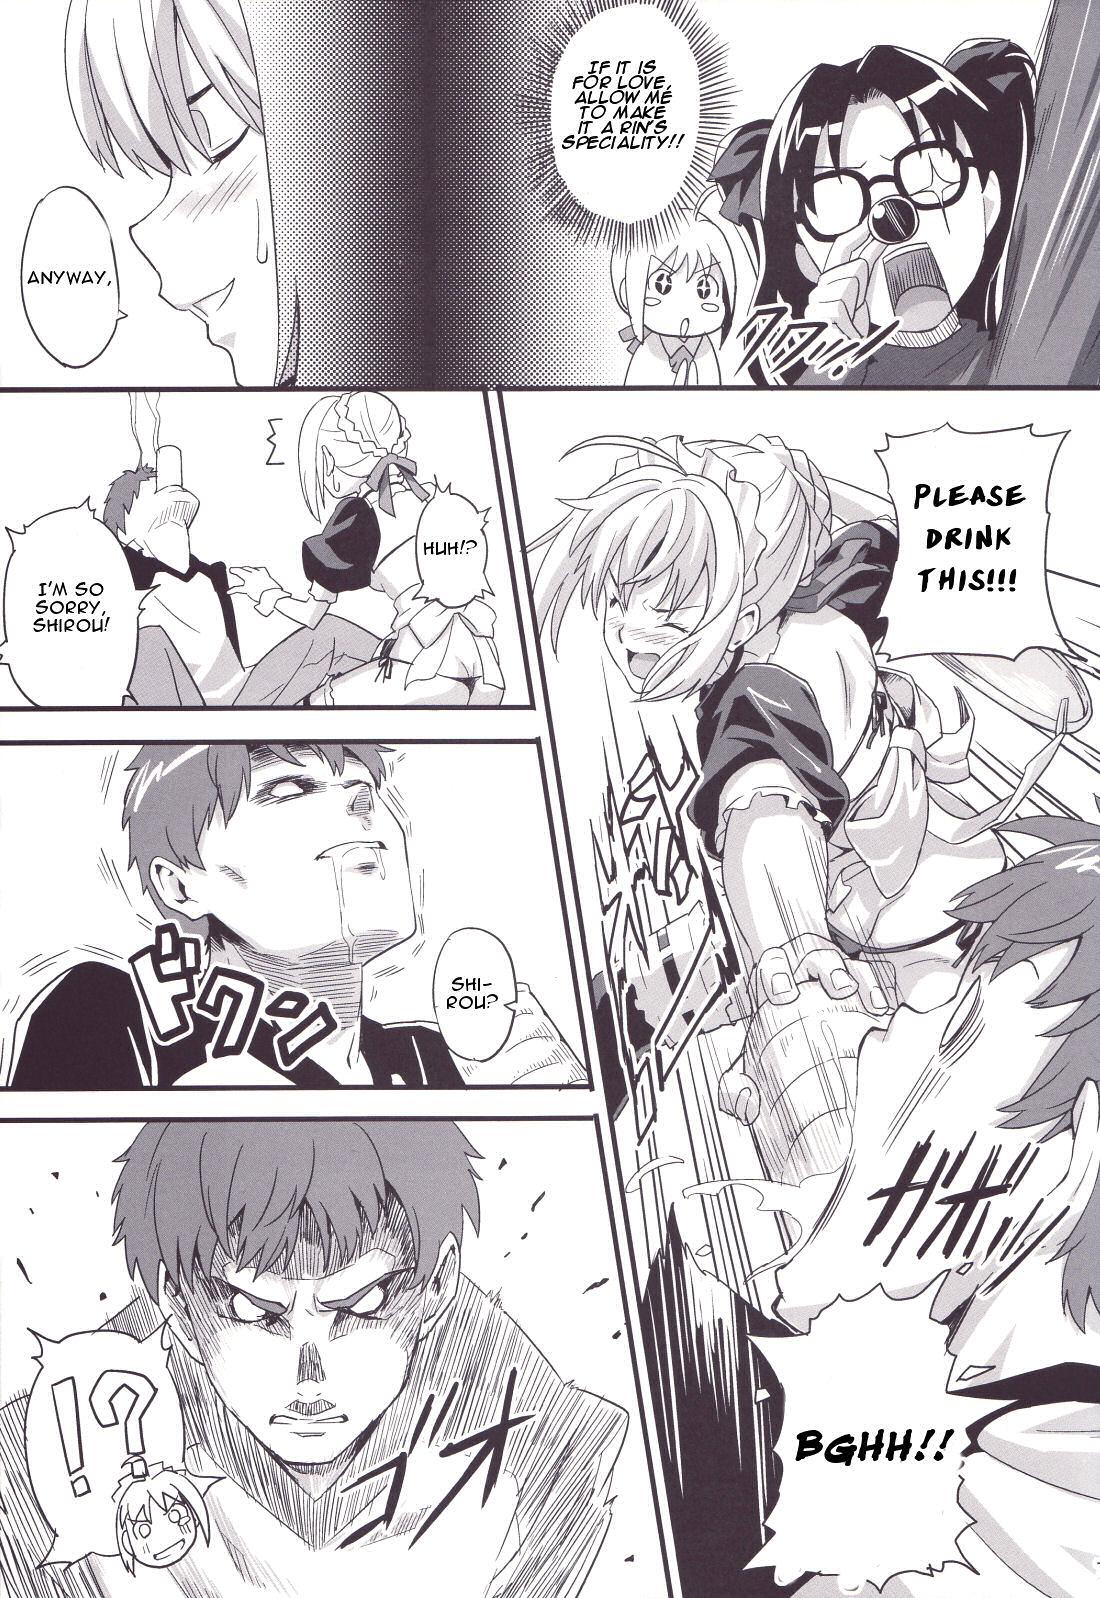 Freaky Outama King of Soul - Fate stay night Roundass - Page 6